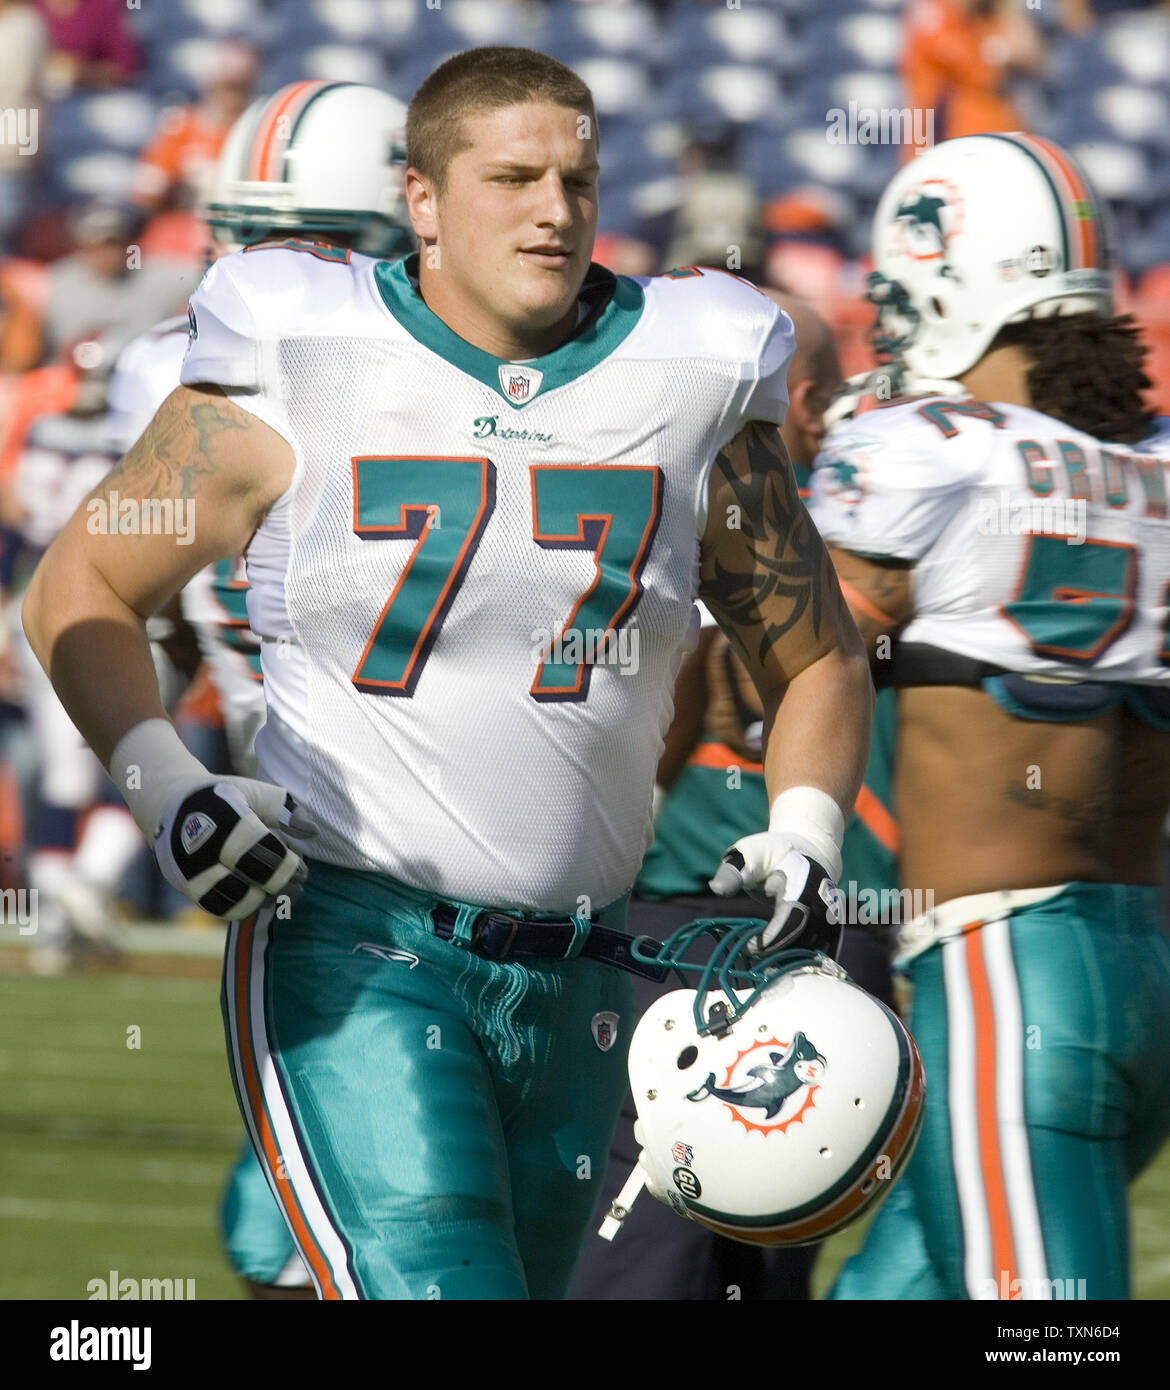 https://c8.alamy.com/comp/TXN6D4/nfl-number-one-overall-draft-choice-miami-dolphins-offensive-tackle-jake-long-warms-up-at-invesco-field-at-mile-high-in-denver-on-november-2-2008-long-from-lapeer-michigan-played-for-the-university-of-michigan-upi-photo-gary-c-caskey-TXN6D4.jpg